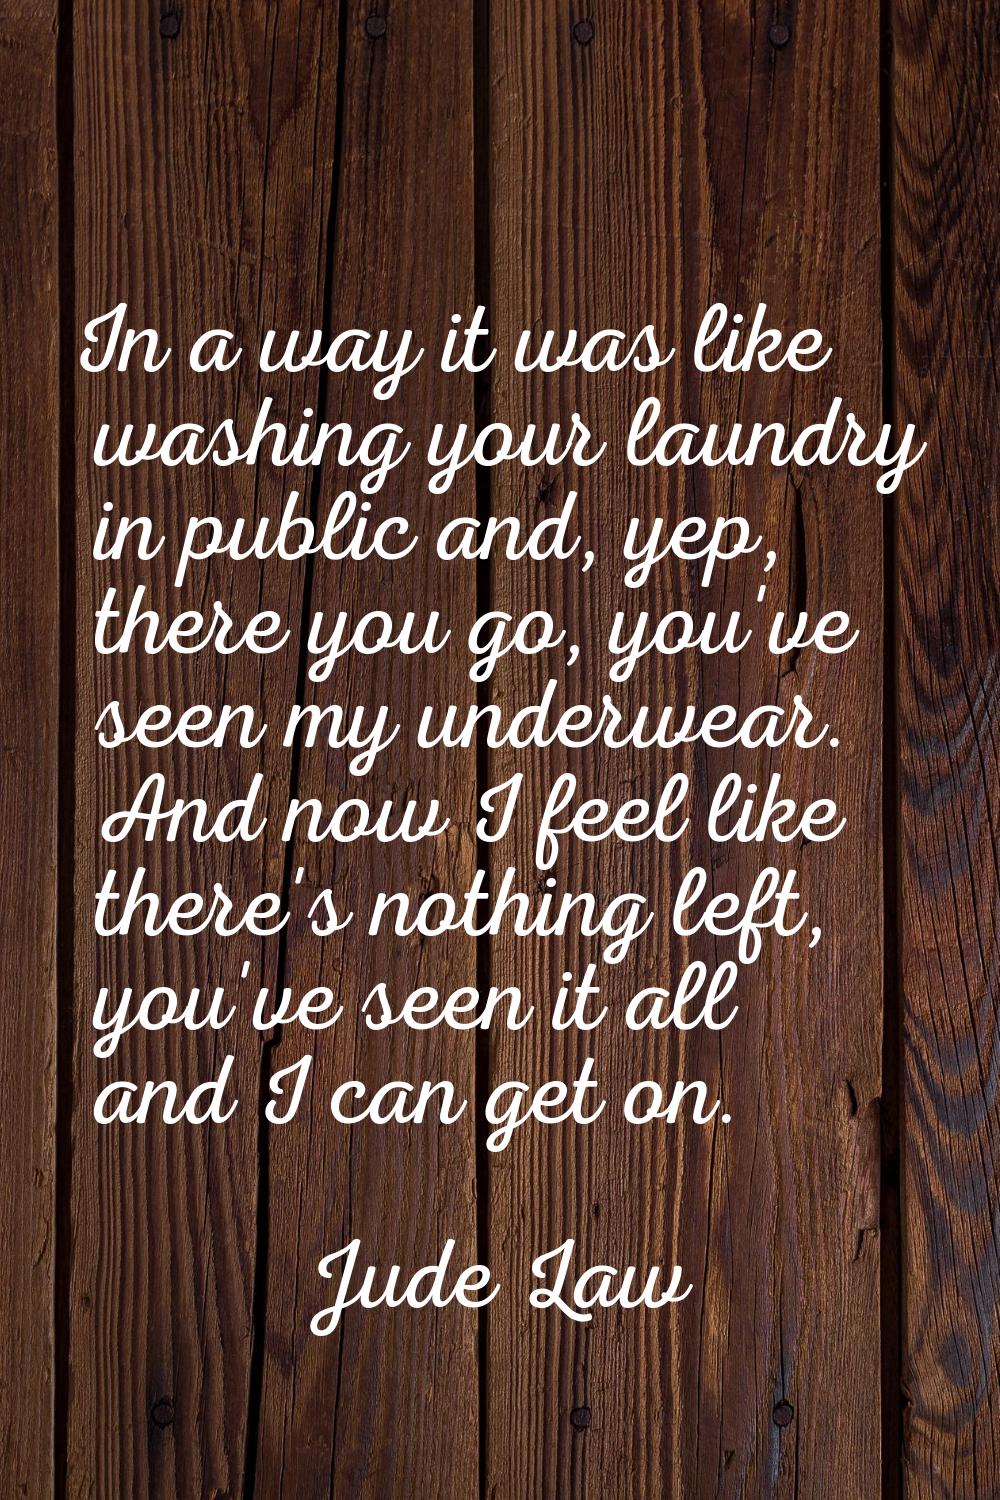 In a way it was like washing your laundry in public and, yep, there you go, you've seen my underwea